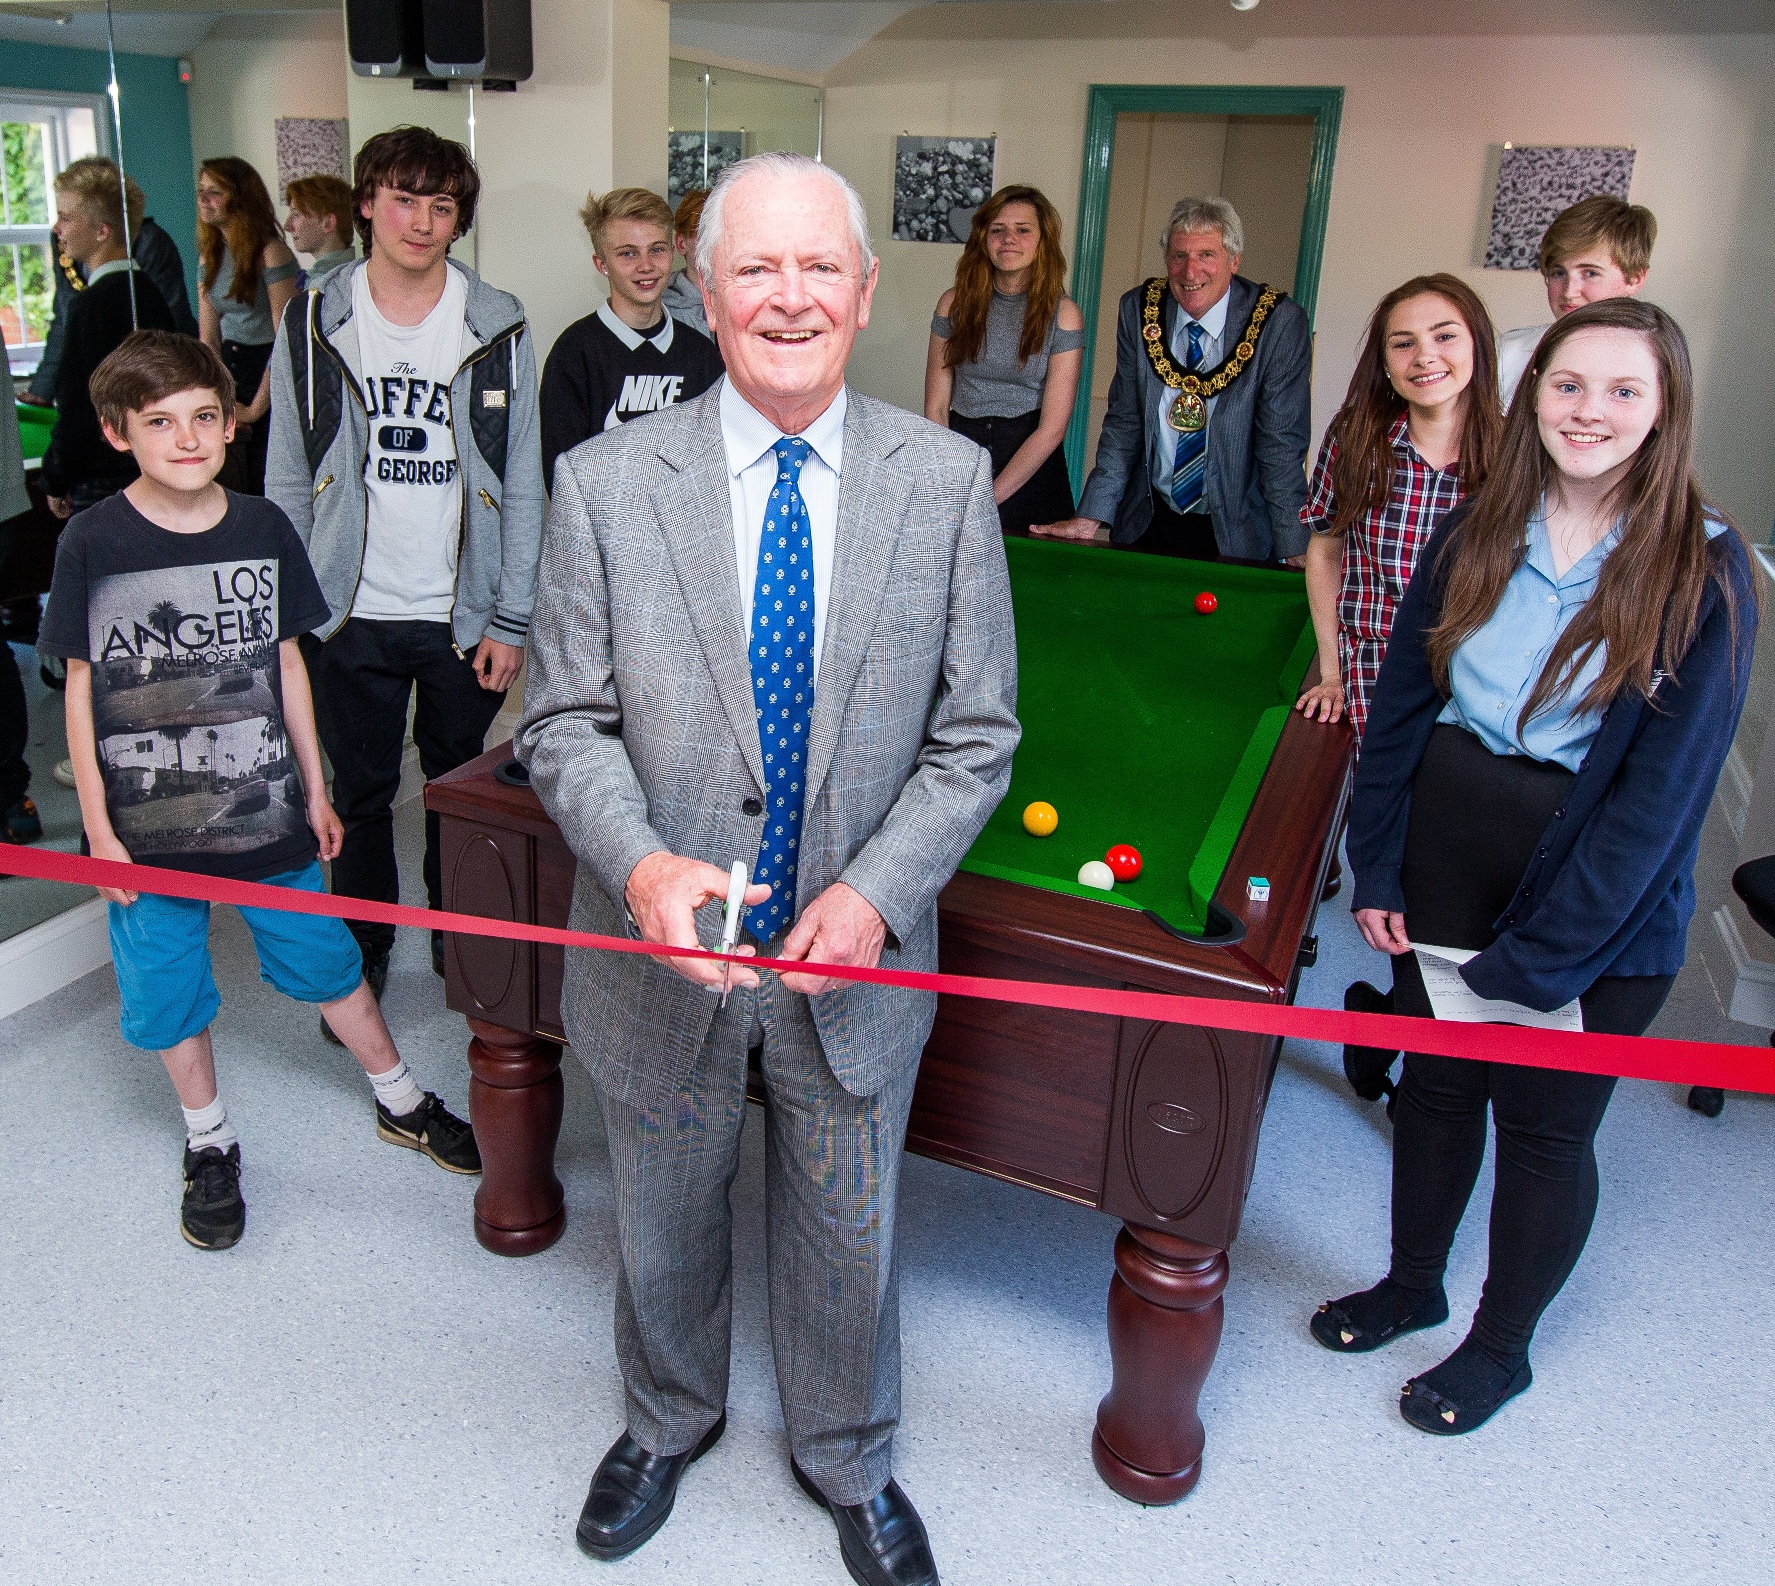 Mike Hill cuts to the ribbon to launch the new Youth Hub in Tunbridge Wells.